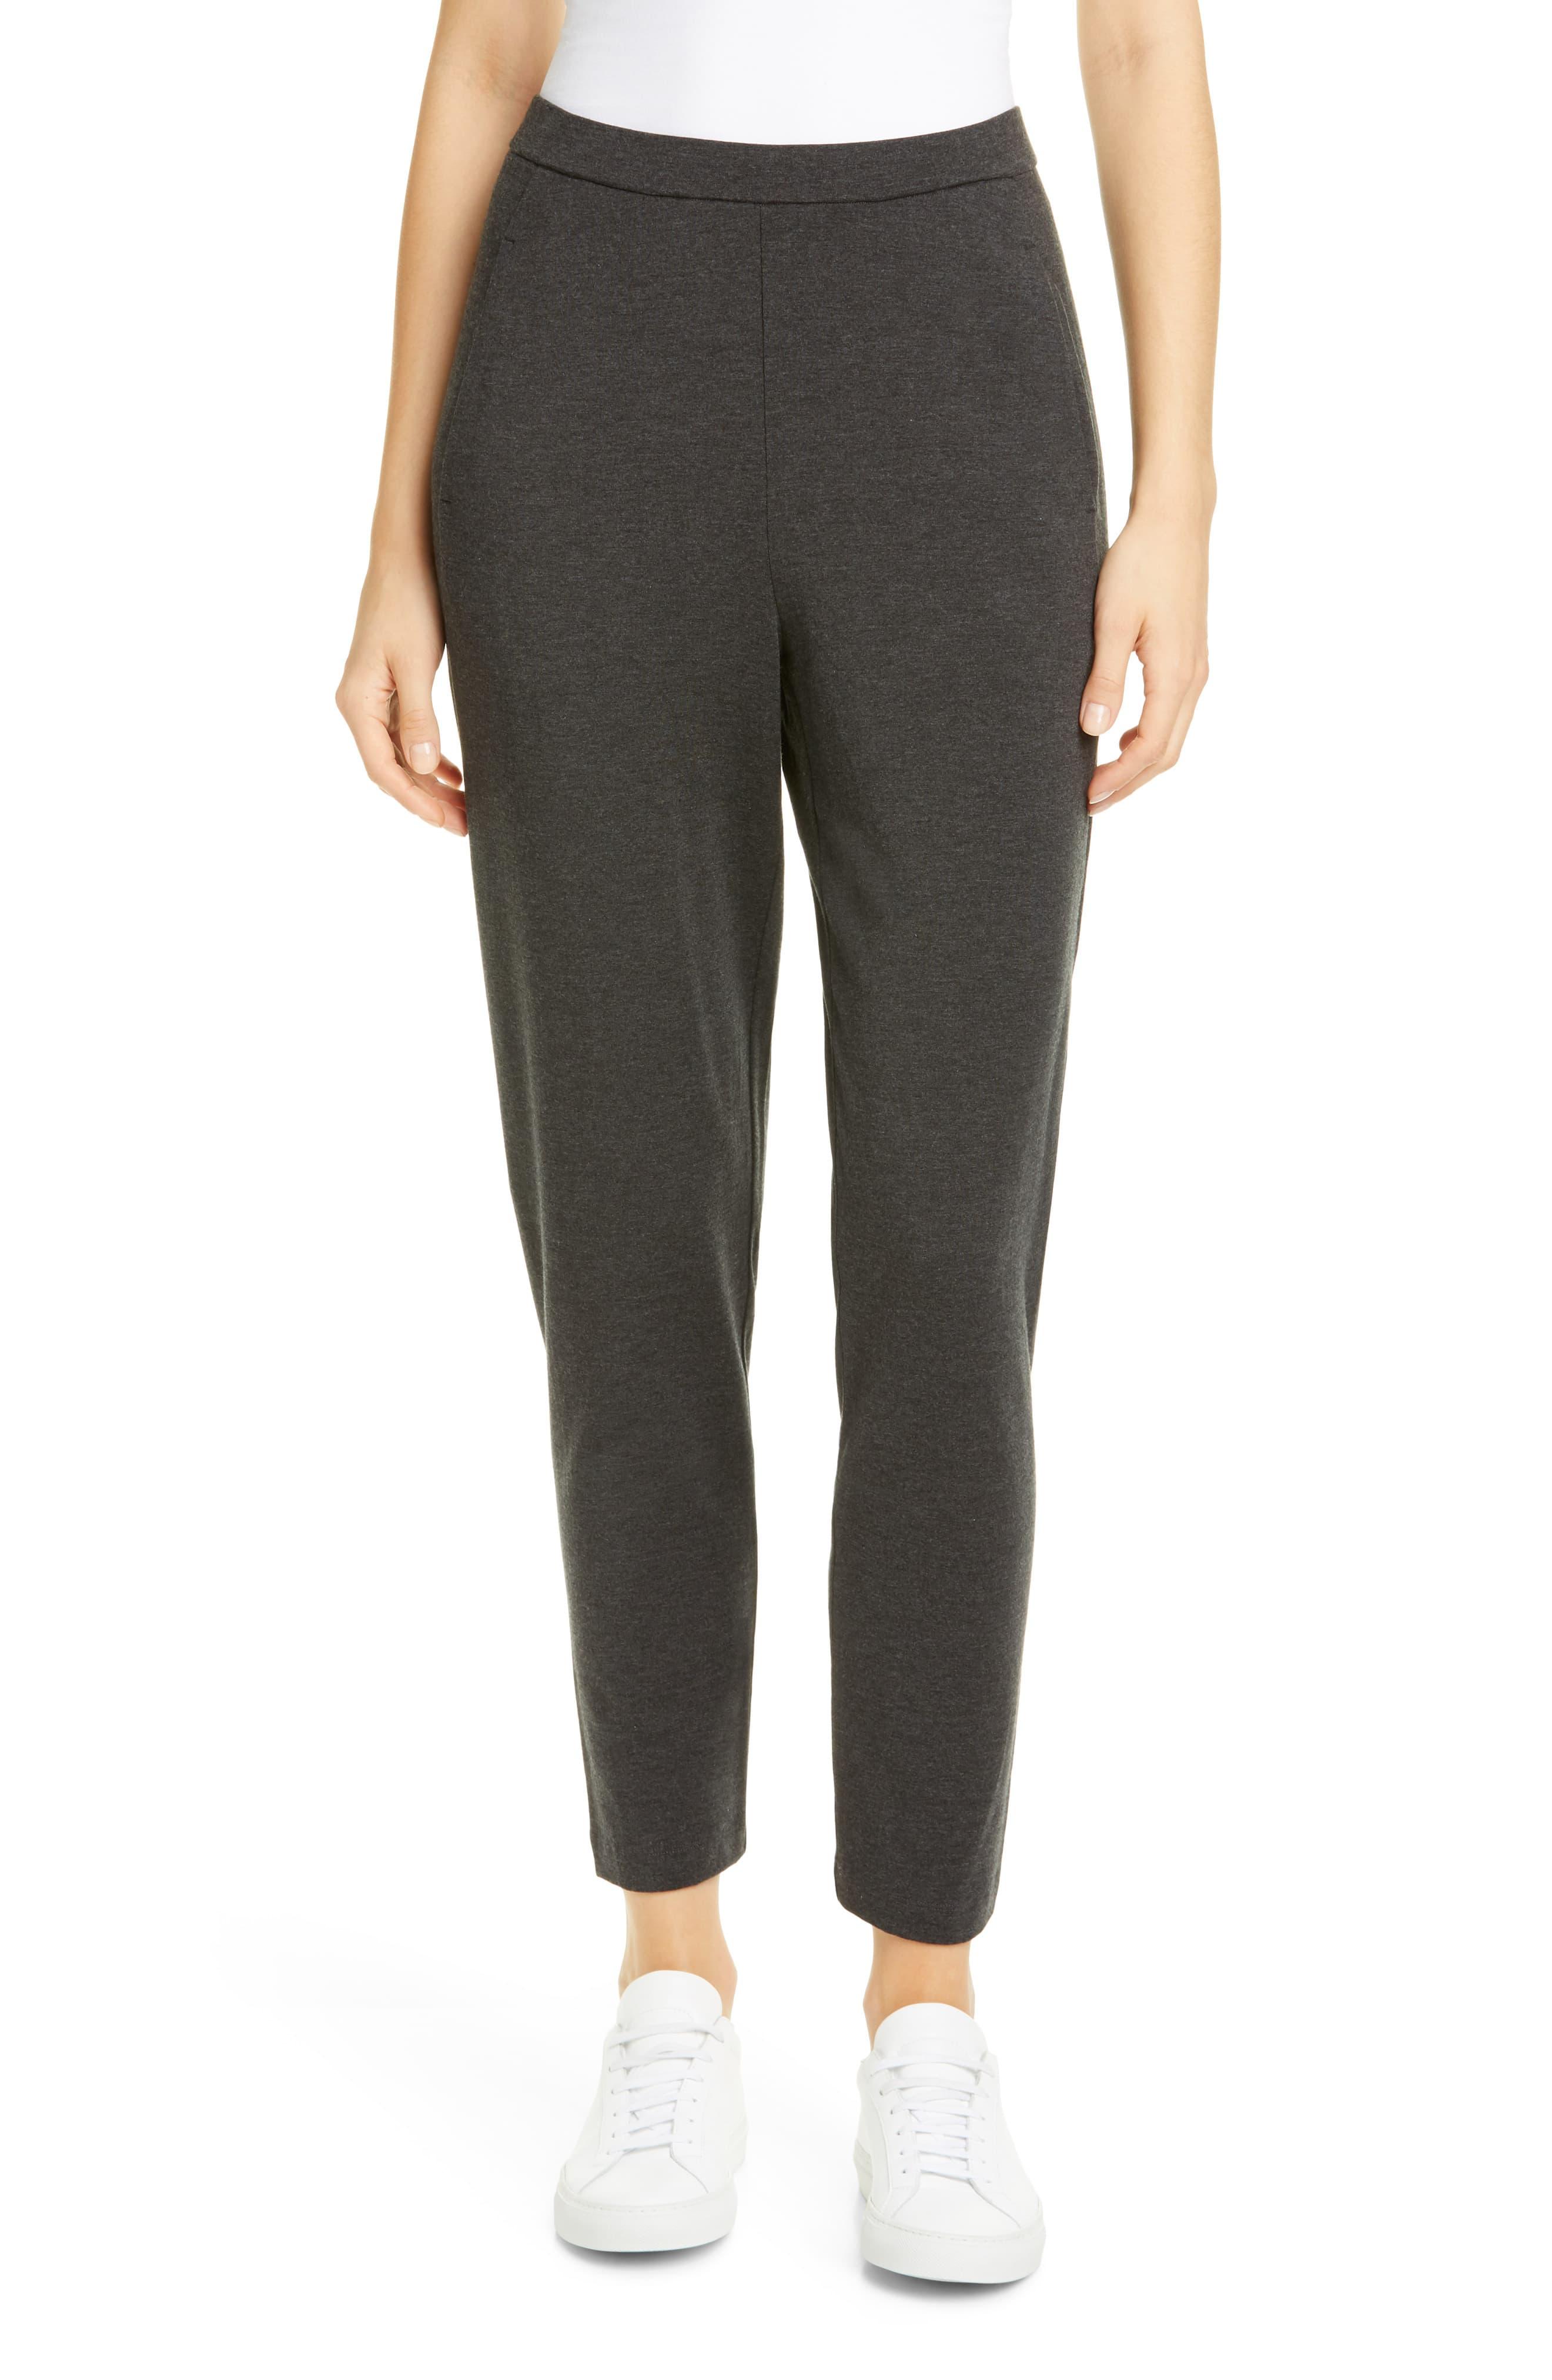 Eileen Fisher Slouchy Slim Ankle Pants in Charcoal (Gray) - Lyst